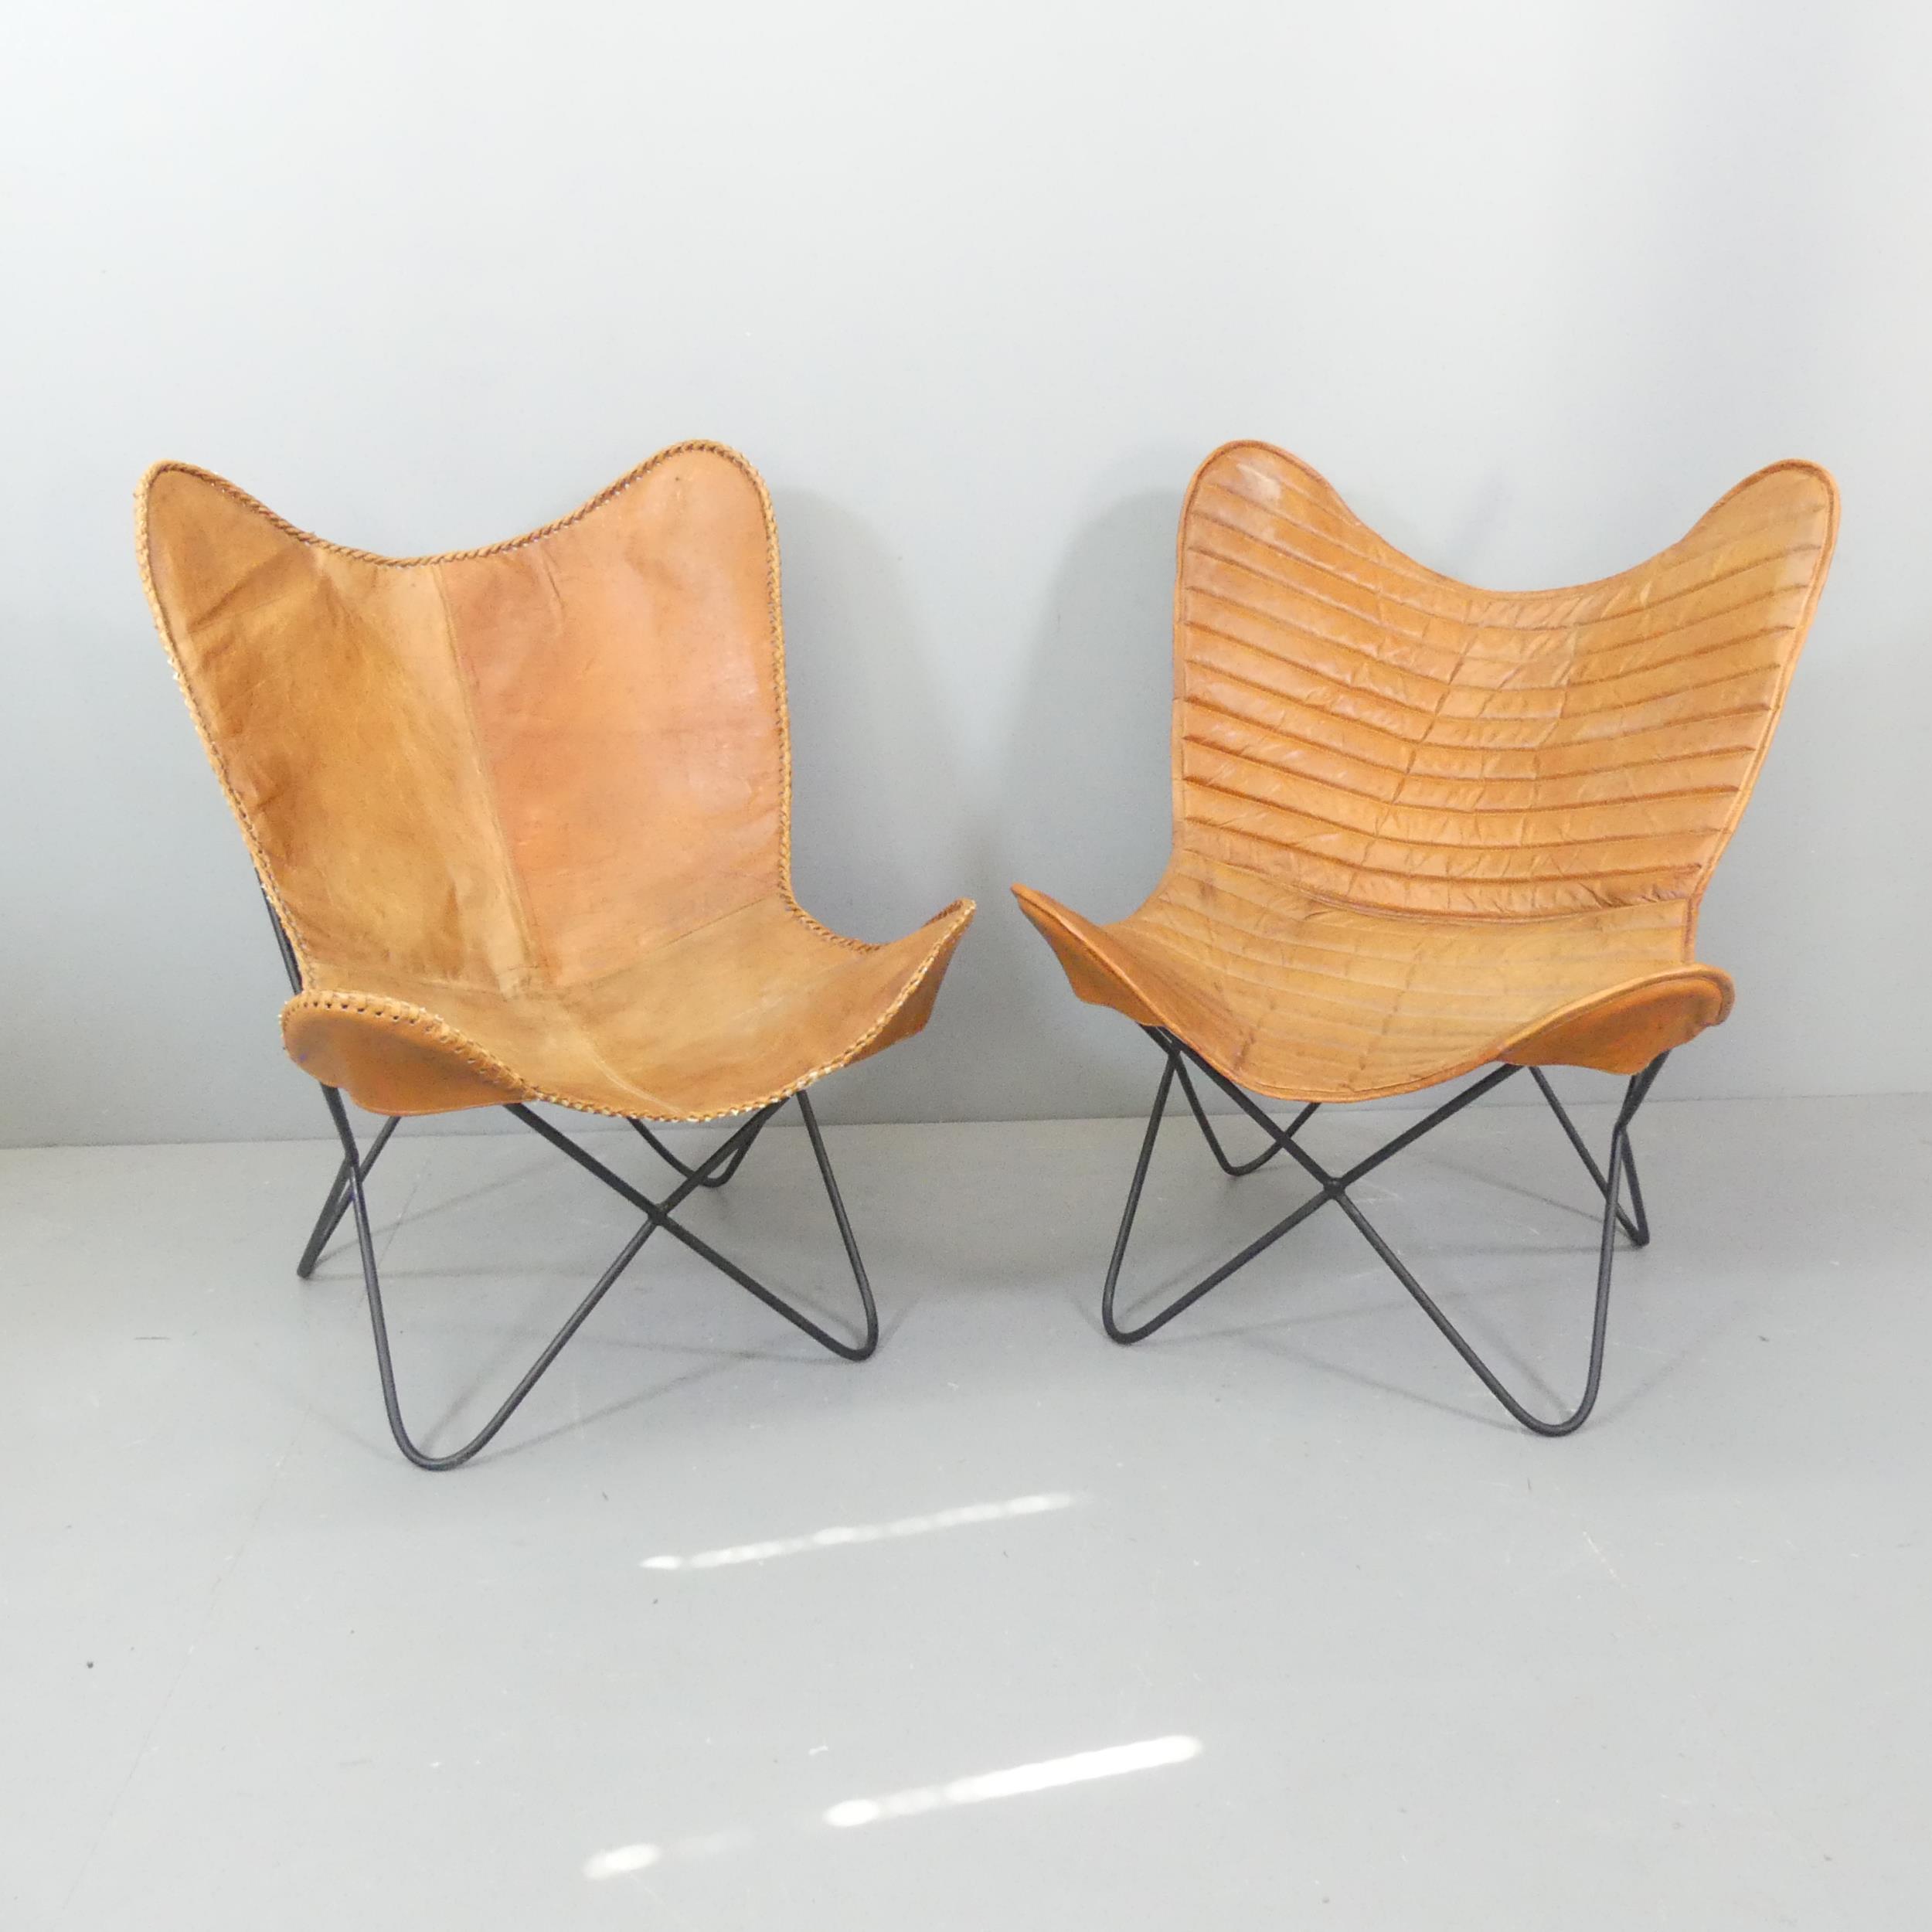 A pair of mid-century design butterfly chairs, with leather sling seats on tubular metal frames.